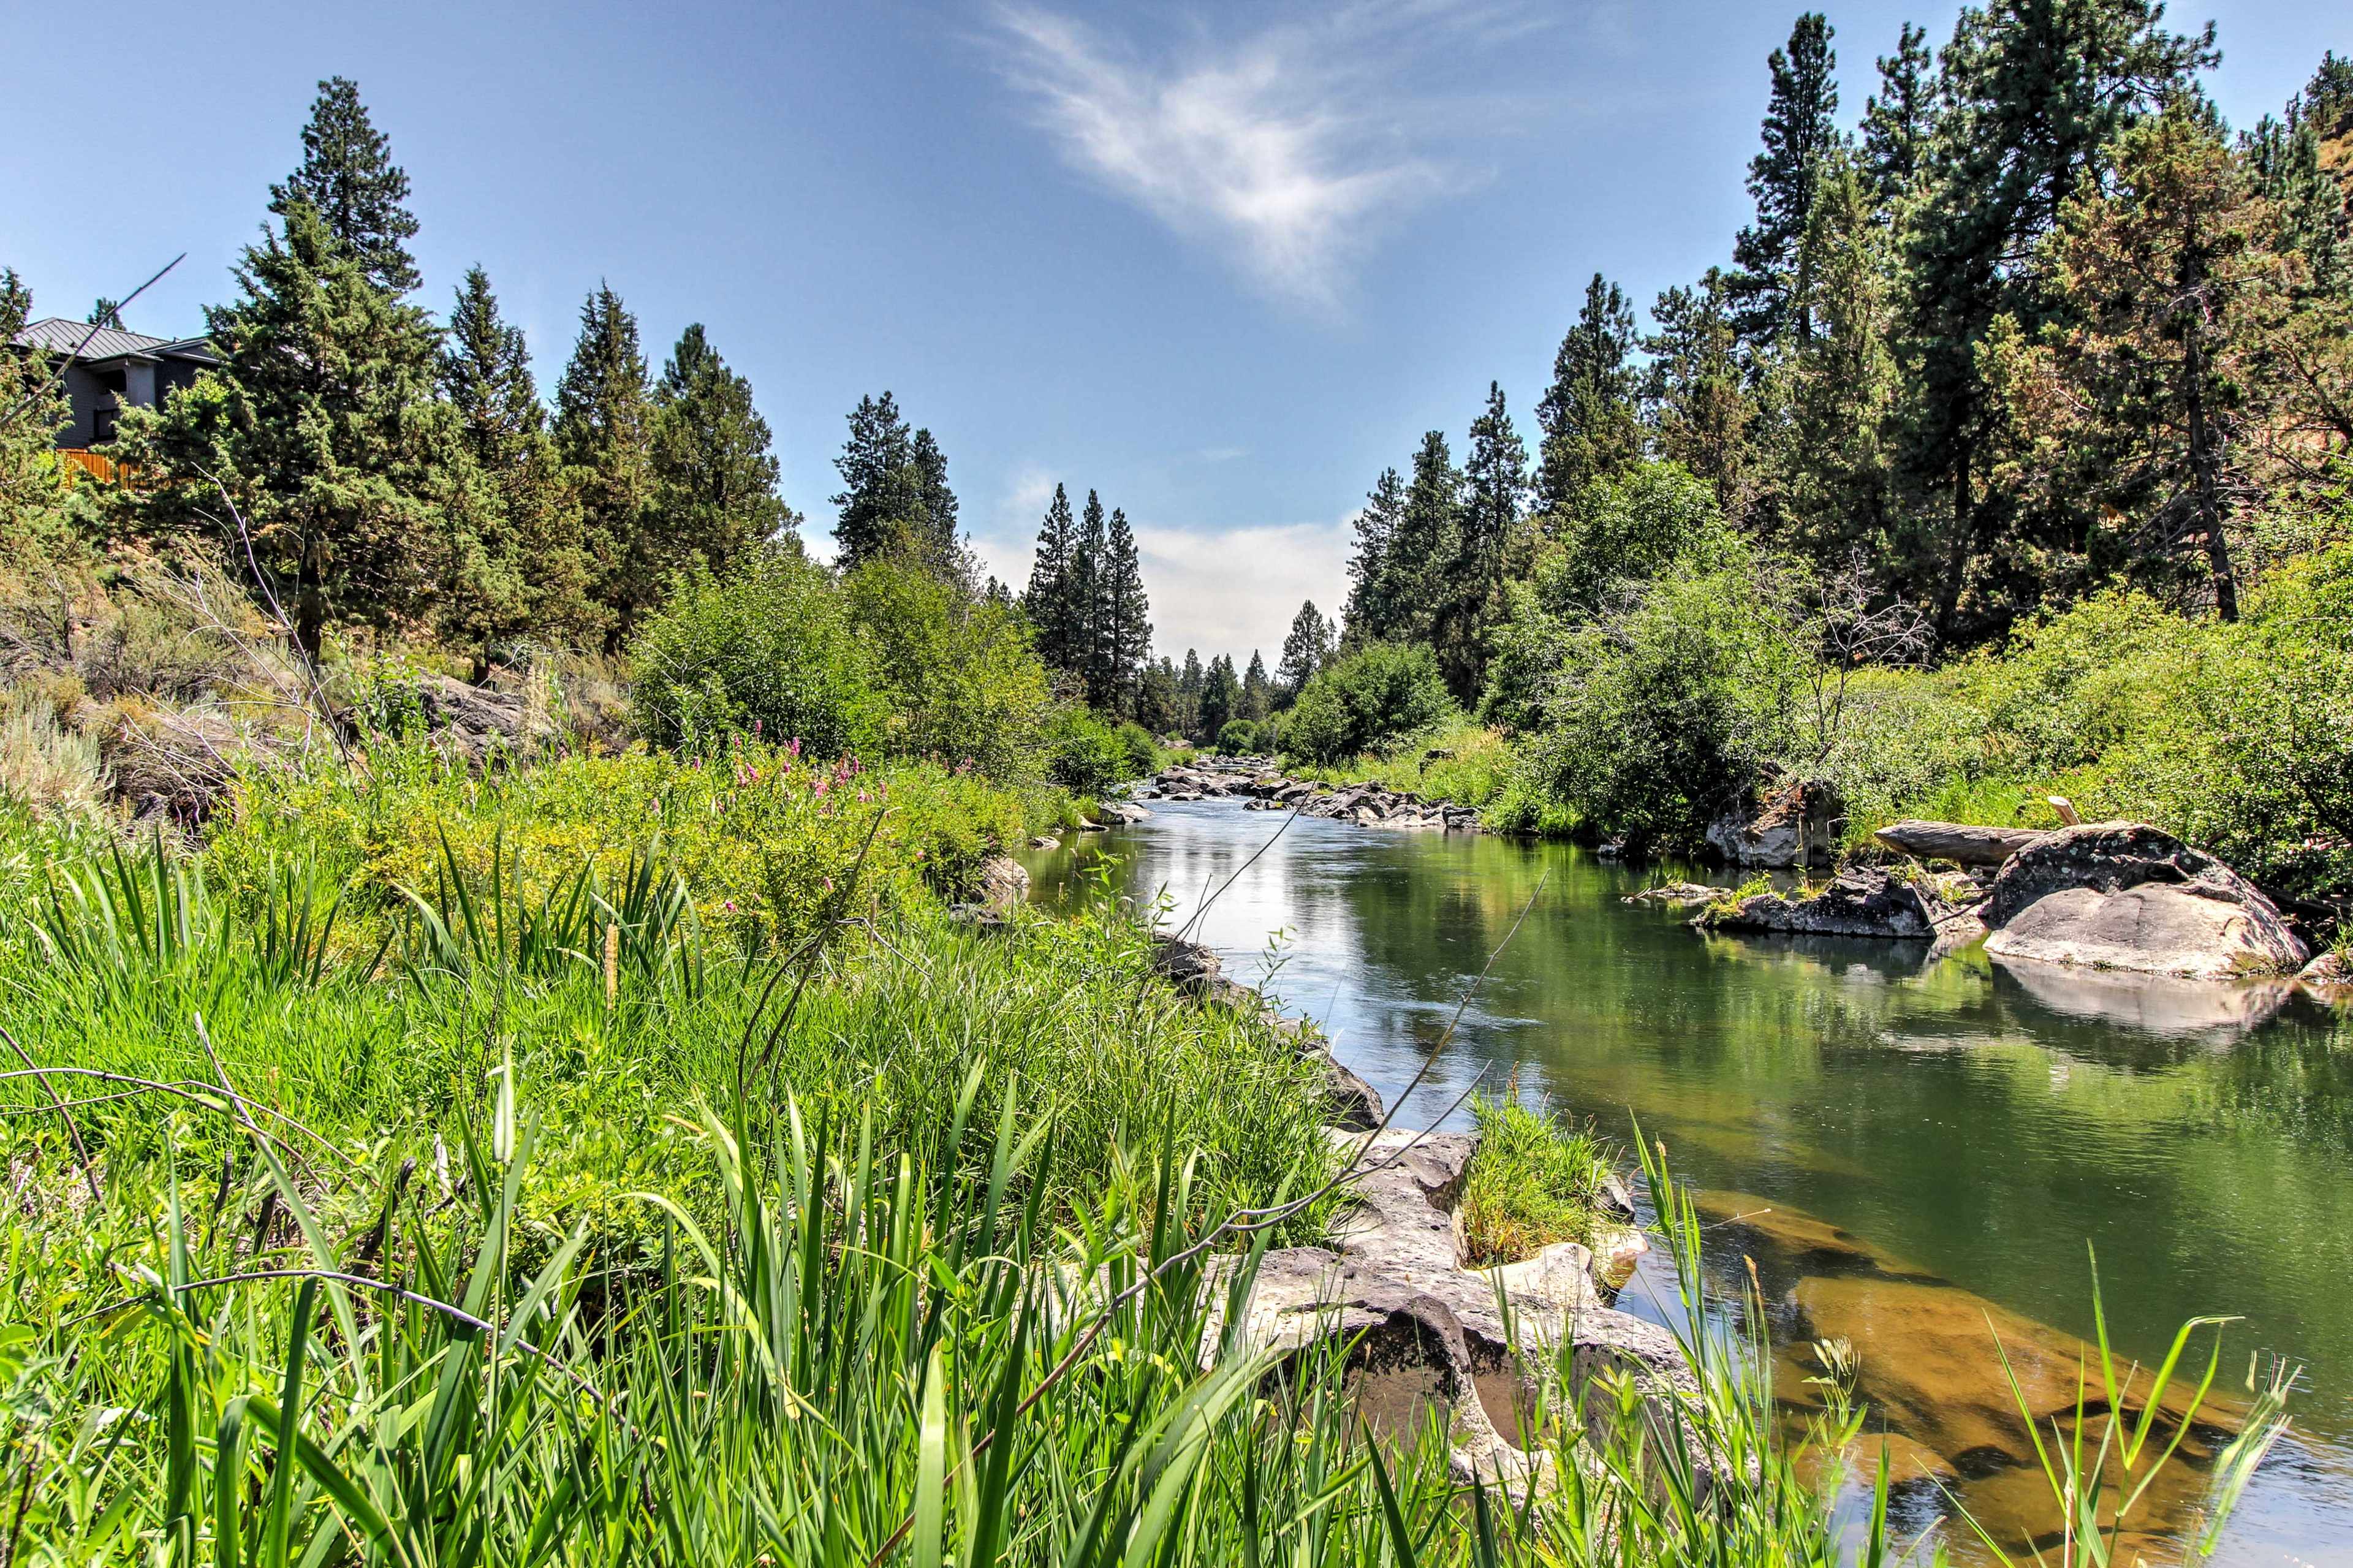 View of green grass, a winding river, and green trees in Bend, OR